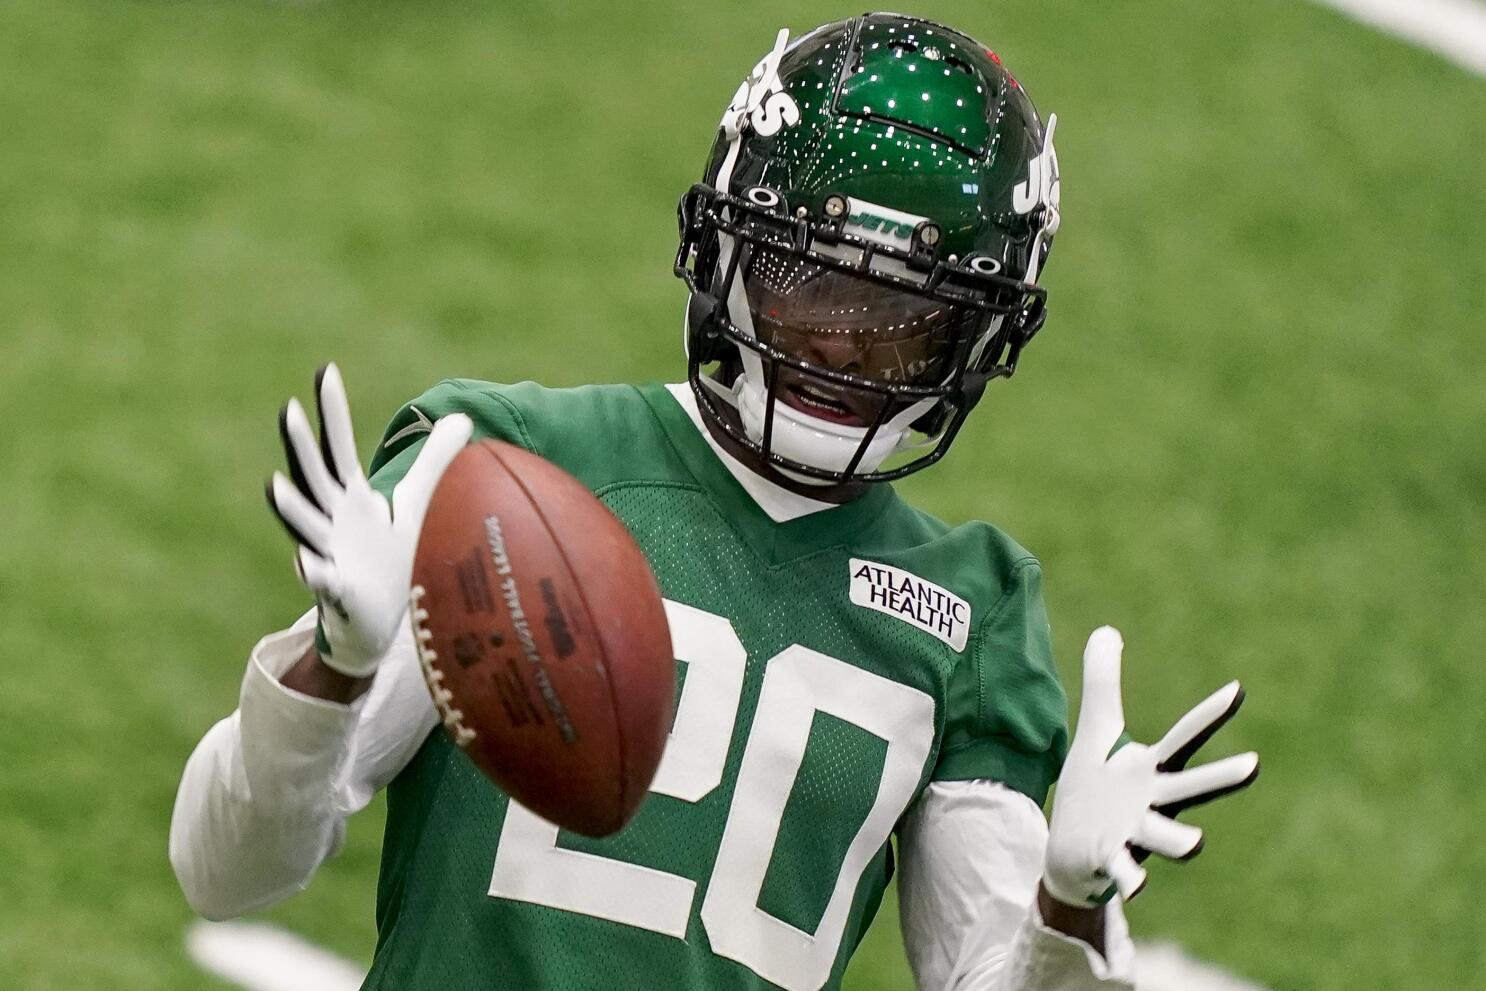 Sauce Gardner, Jets' revamped secondary ready for bigger tests